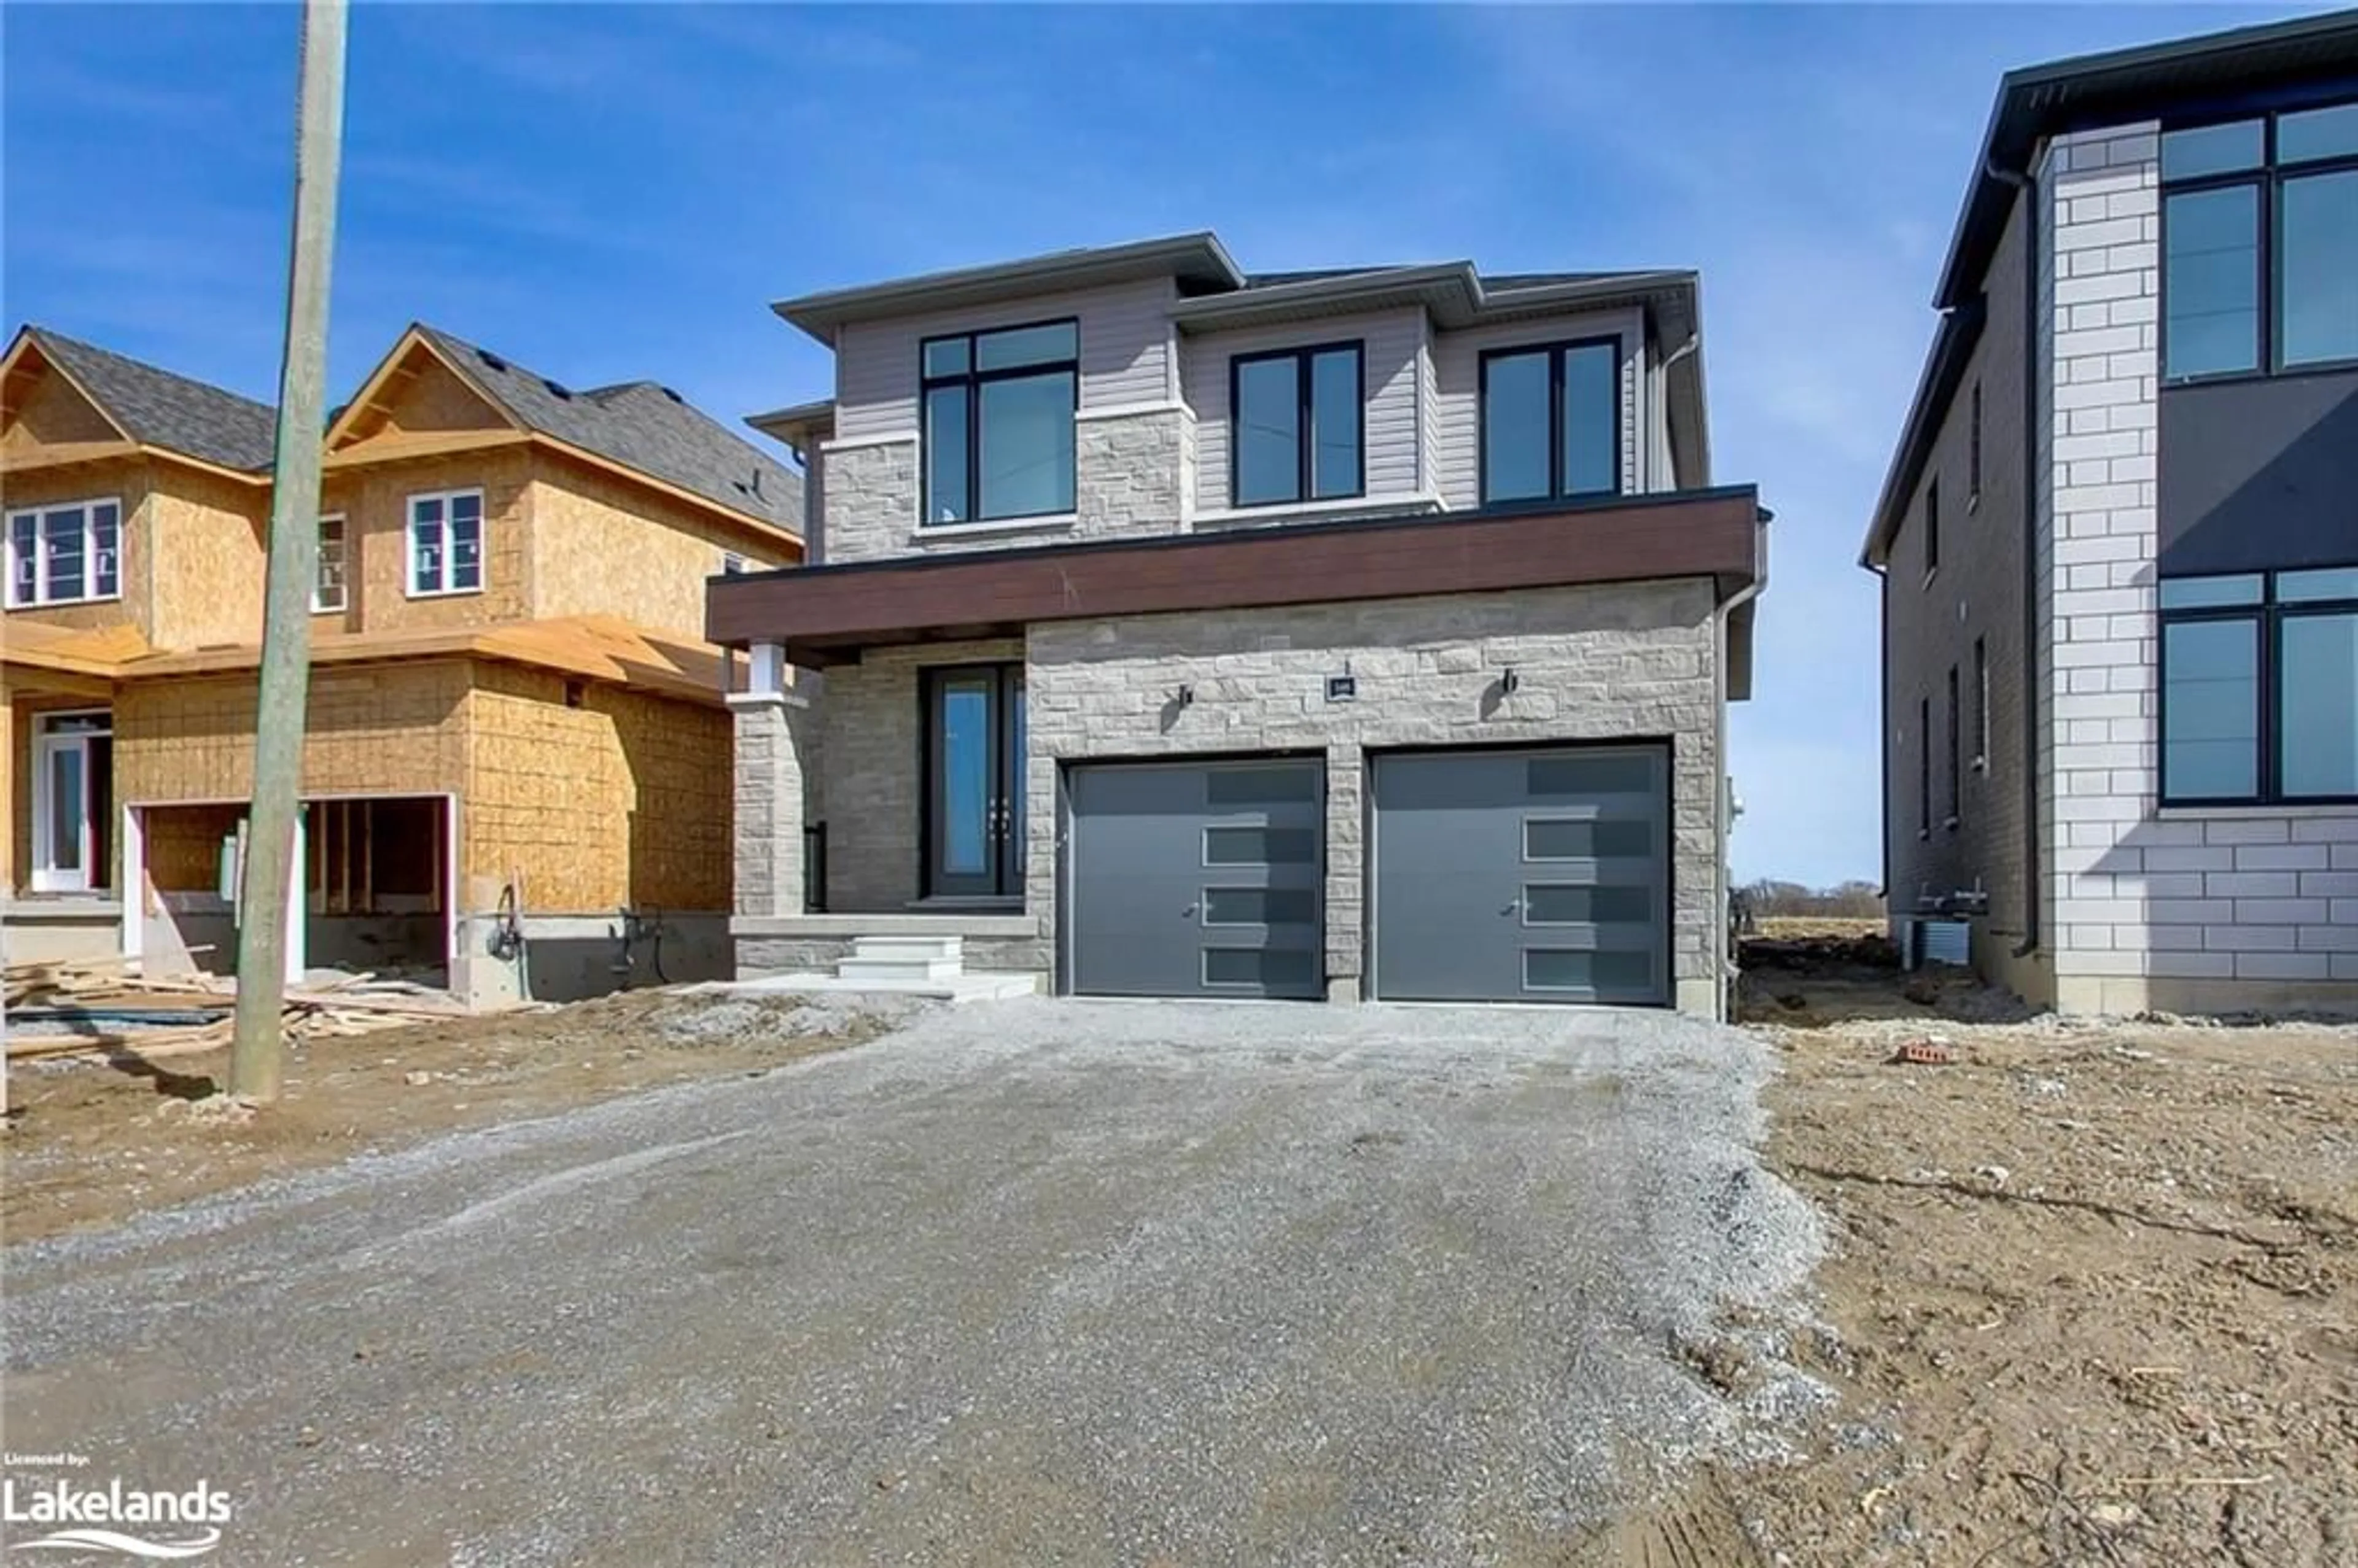 Home with brick exterior material for 148 Union Blvd, Wasaga Beach Ontario L9Z 0P1